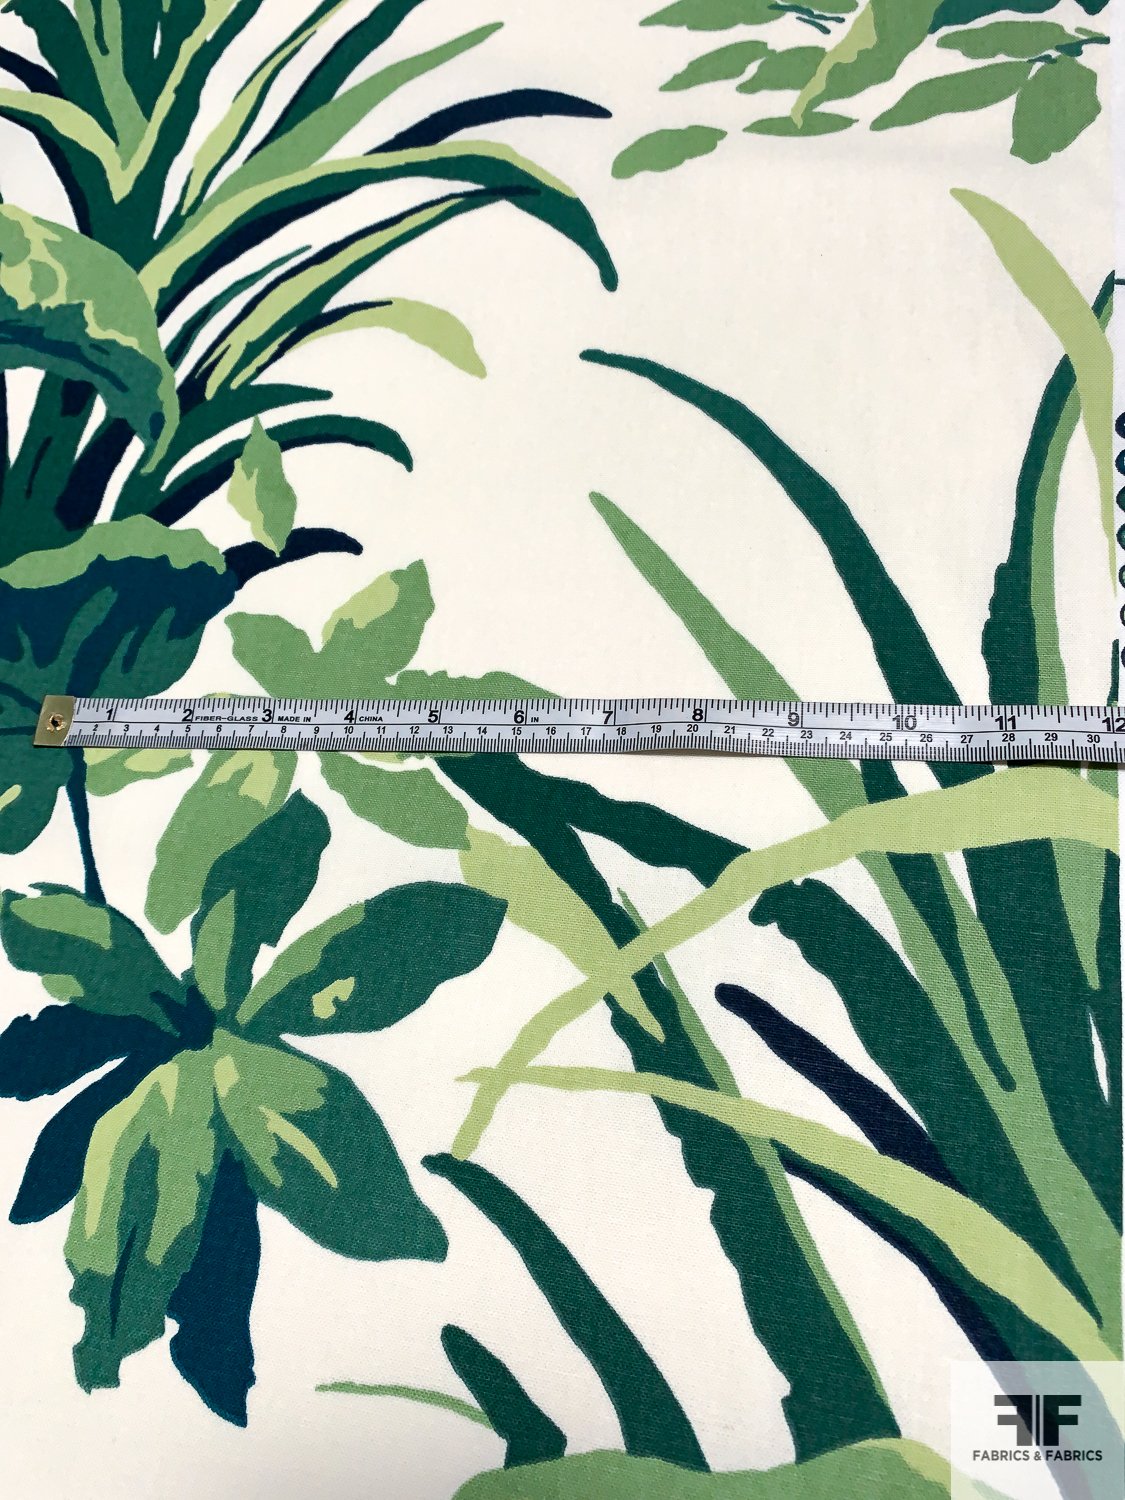 Home Decorative and Apparel-Weight Tropical Long Leaf Printed Cotton Canvas - Shades of Green / Off-White